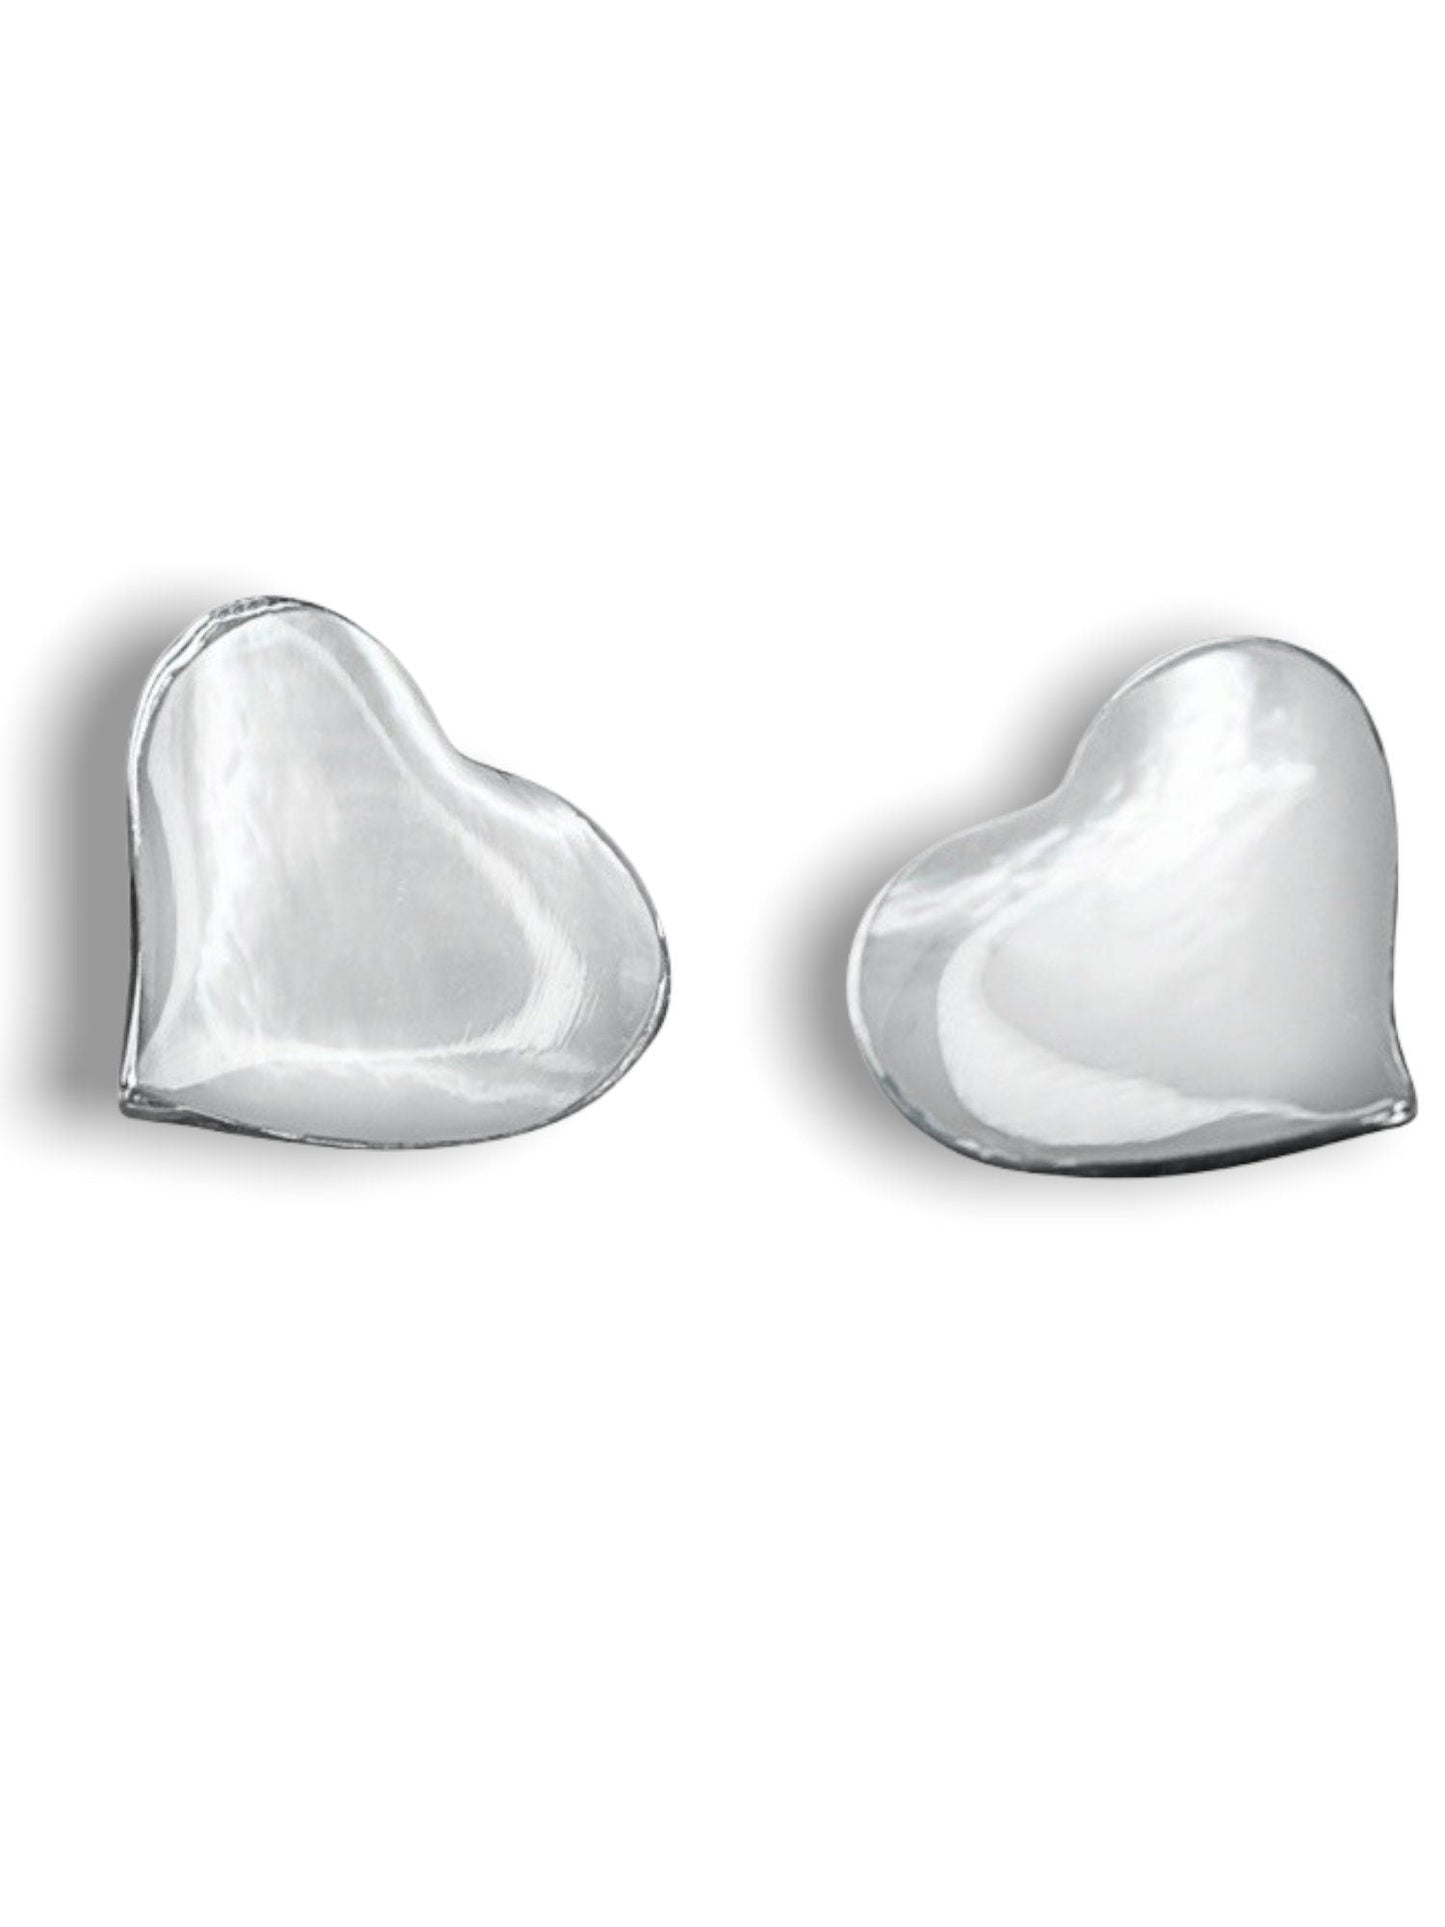 Heart-shaped mother of pearl earrings made of 925 sterling silver - Ear925-94